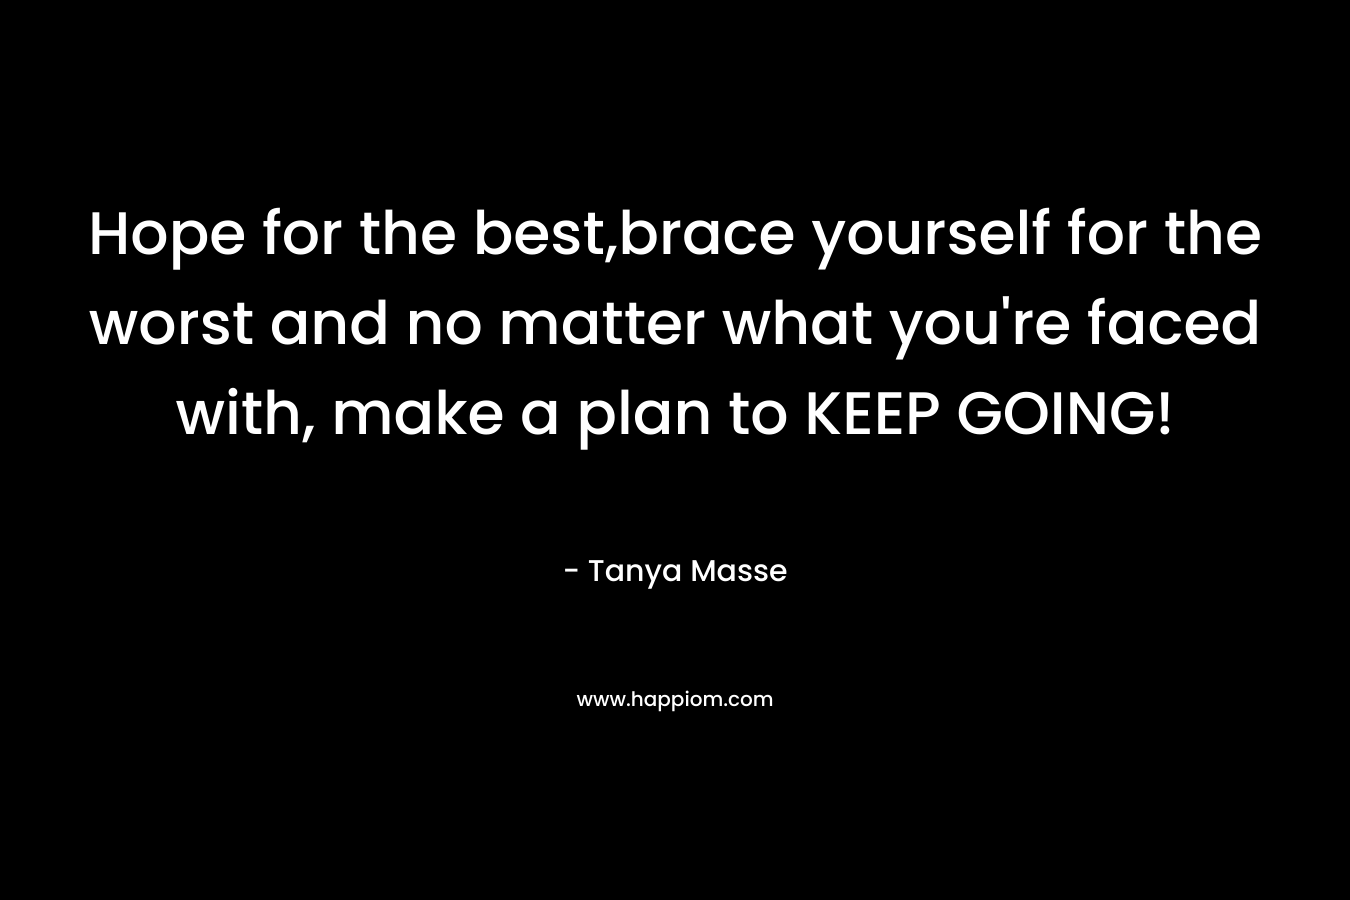 Hope for the best,brace yourself for the worst and no matter what you're faced with, make a plan to KEEP GOING!